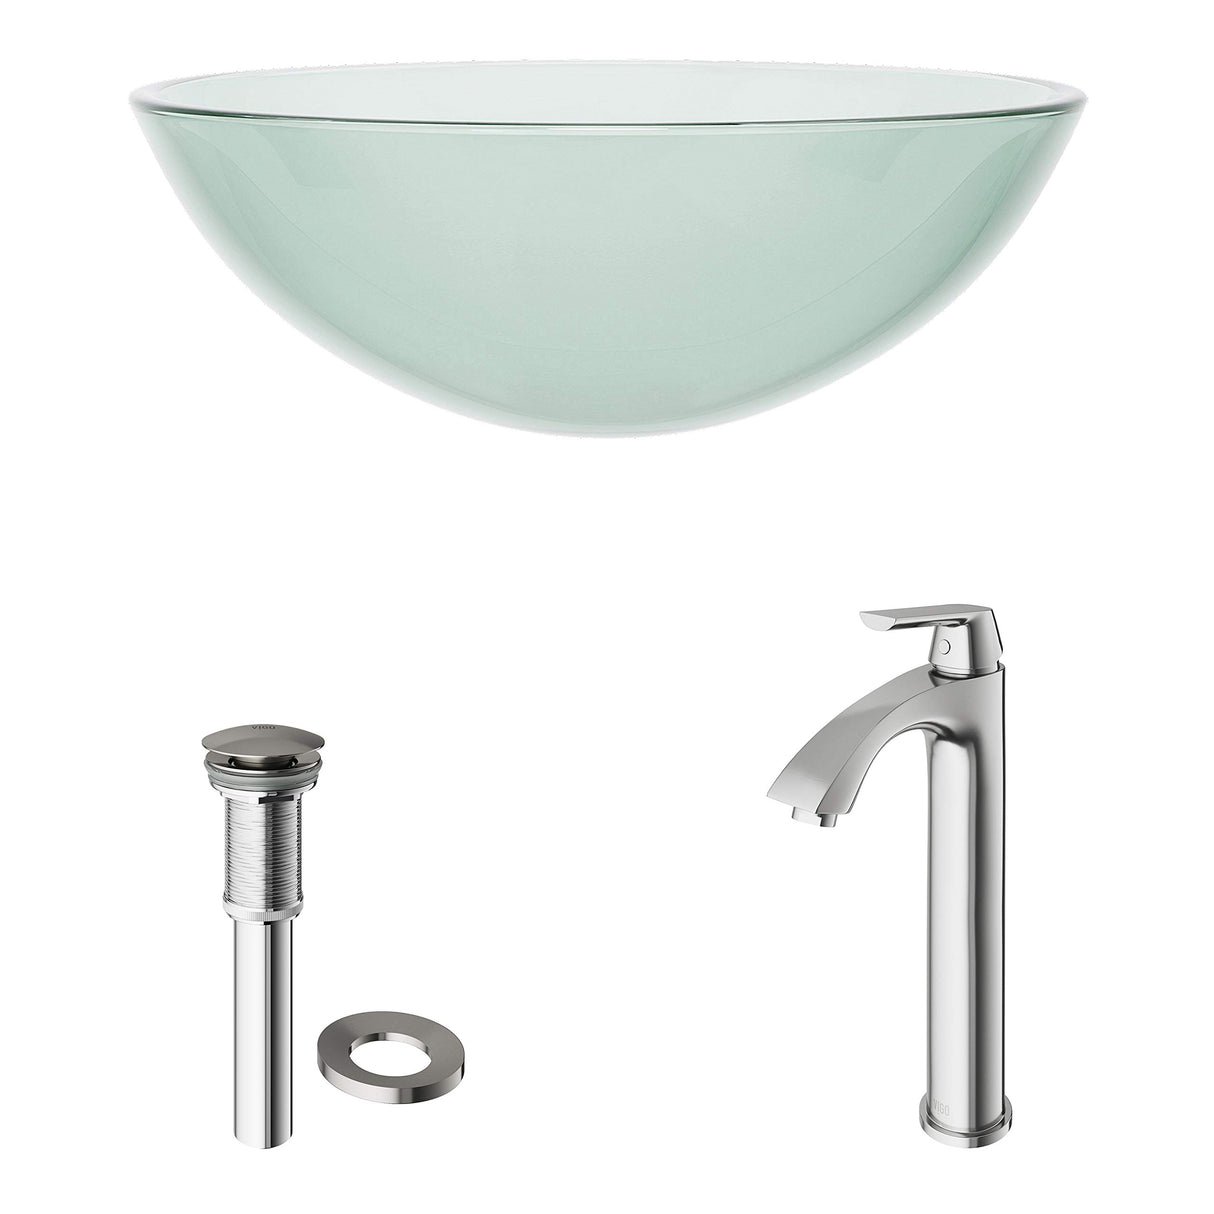 VIGO VGT895 16.5" L -16.5" W -12.38" H Handmade Countertop Glass Round Vessel Bathroom Sink Set in Iridescent Finish with Brushed Nickel Single-Handle Single Hole Faucet and Pop Up Drain